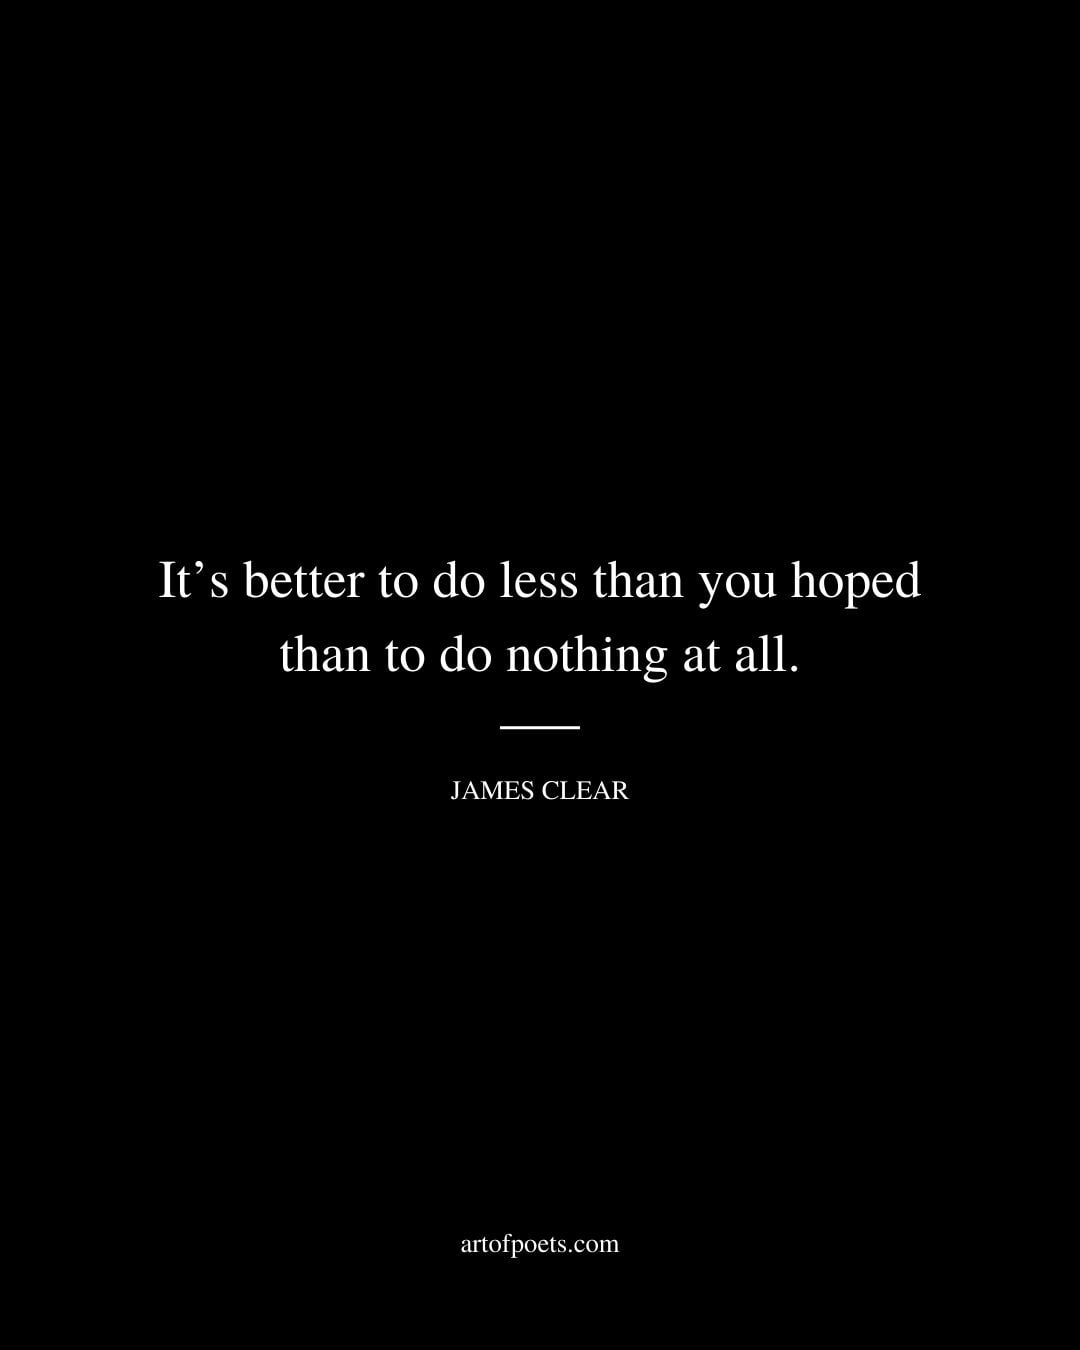 Its better to do less than you hoped than to do nothing at all